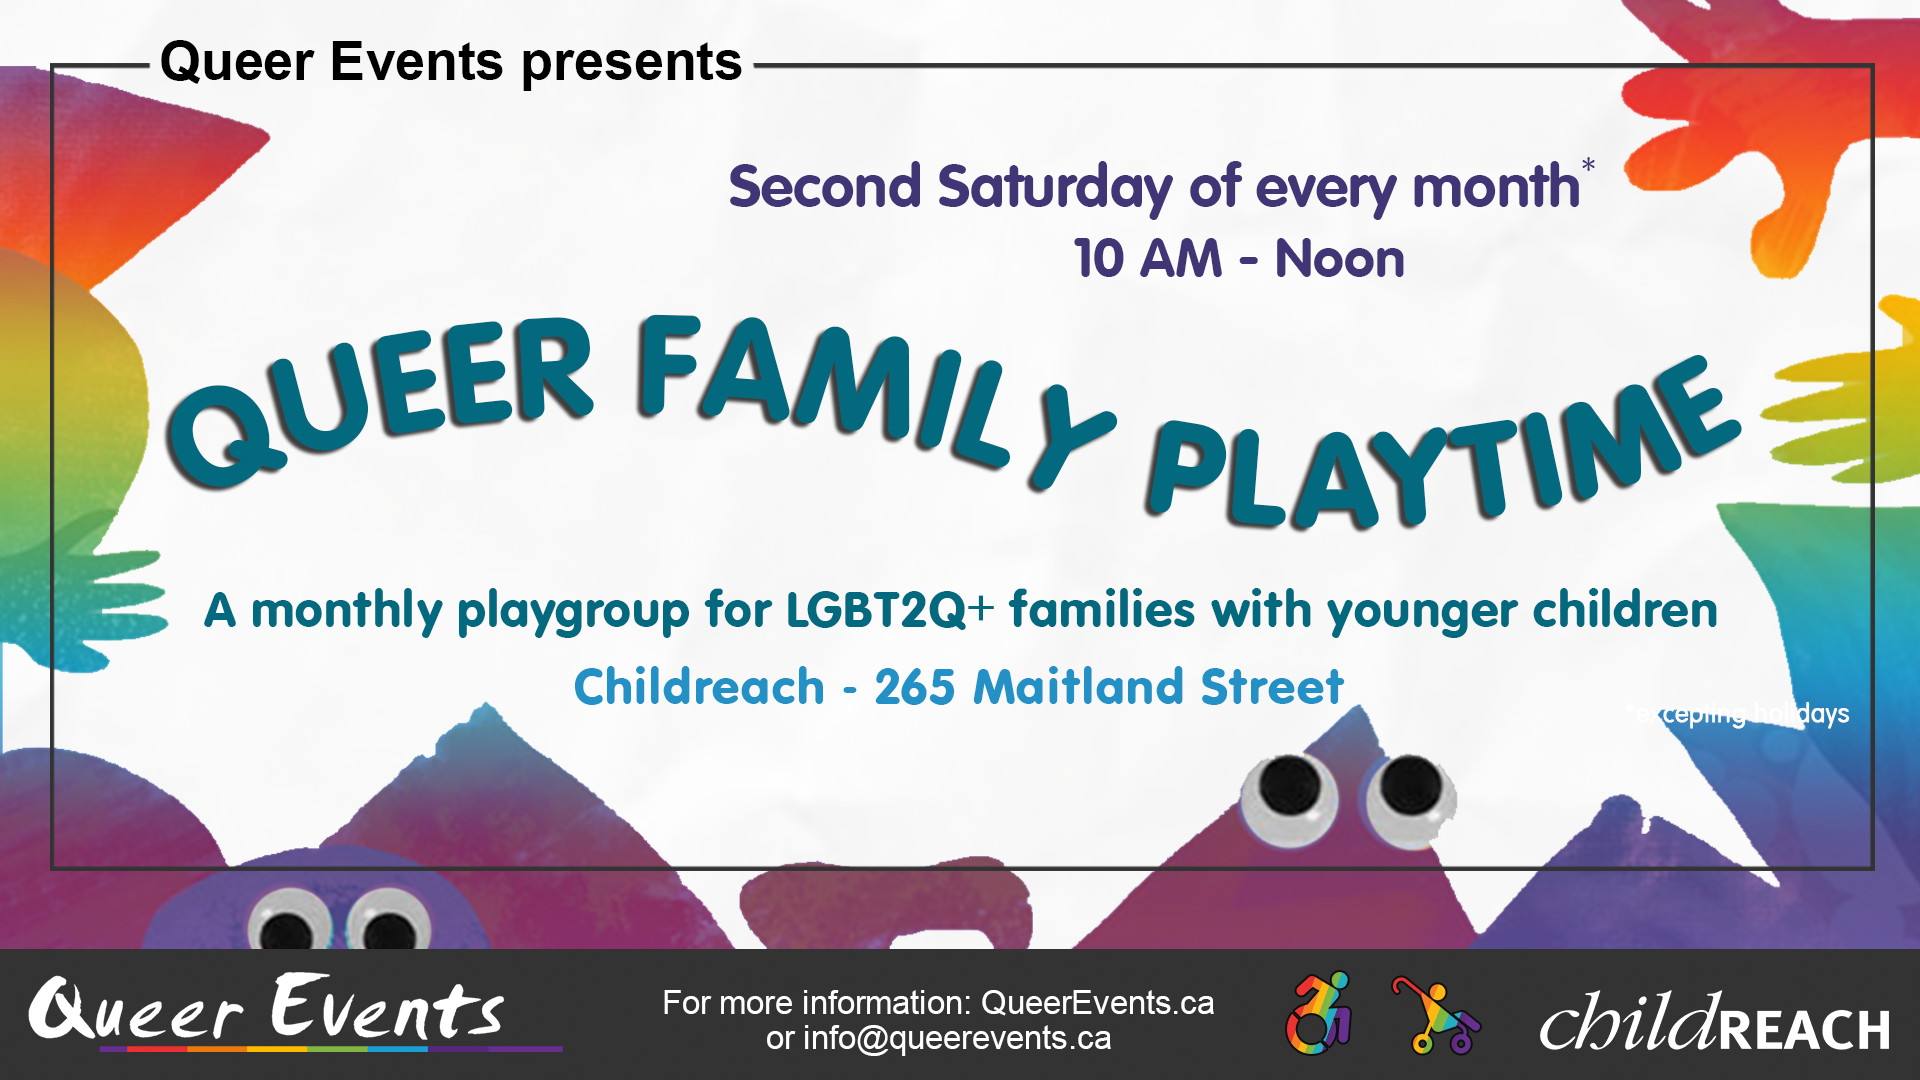 QueerEvents.ca - Queer Family Playtime - event banner